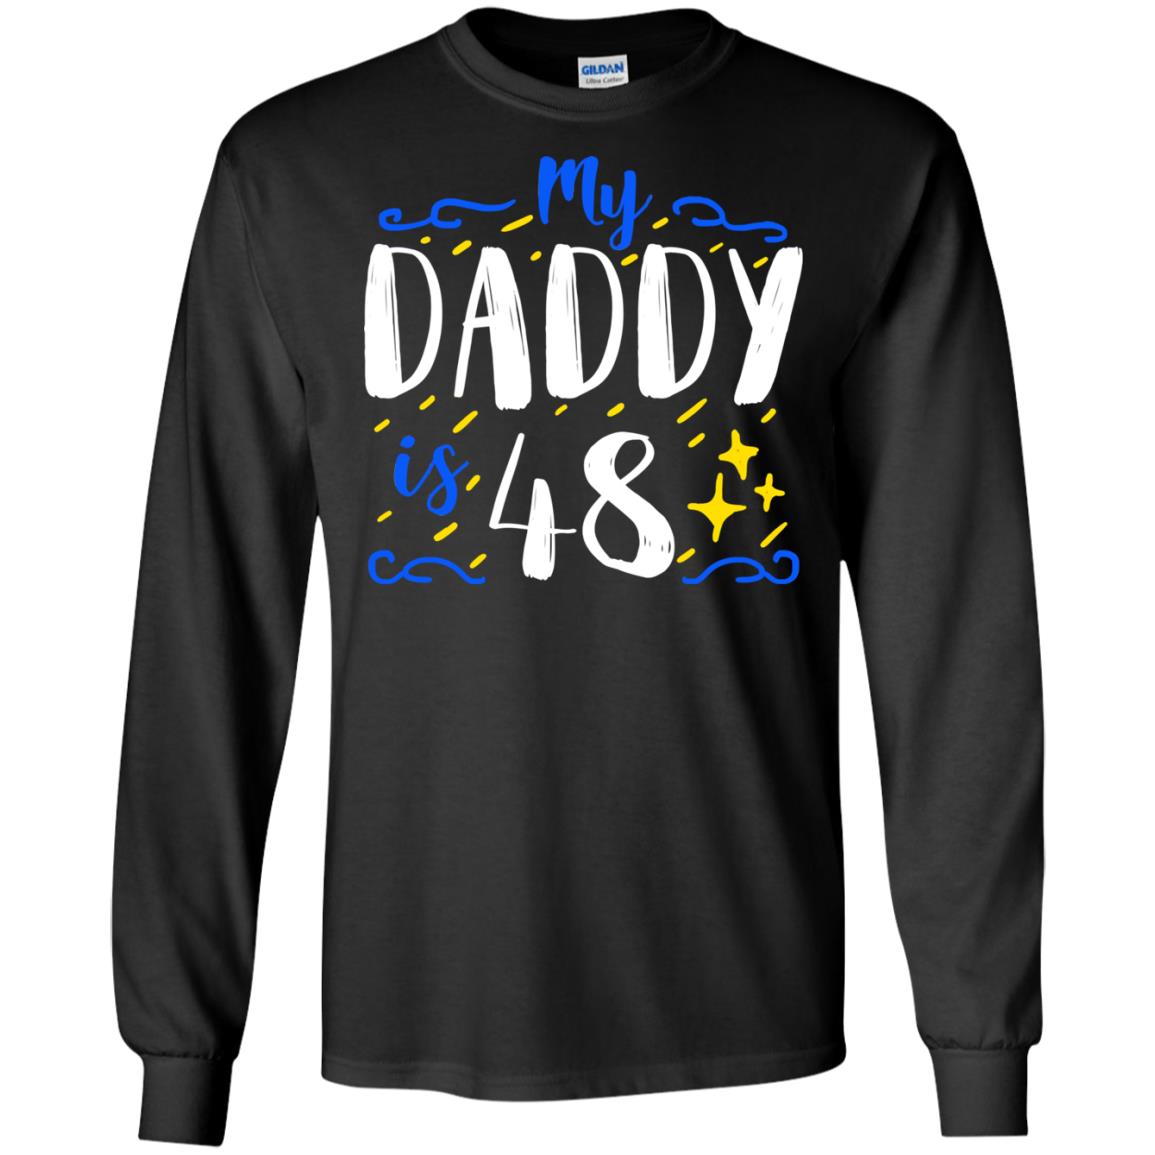 My Daddy Is 48 48th Birthday Daddy Shirt For Sons Or DaughtersG240 Gildan LS Ultra Cotton T-Shirt